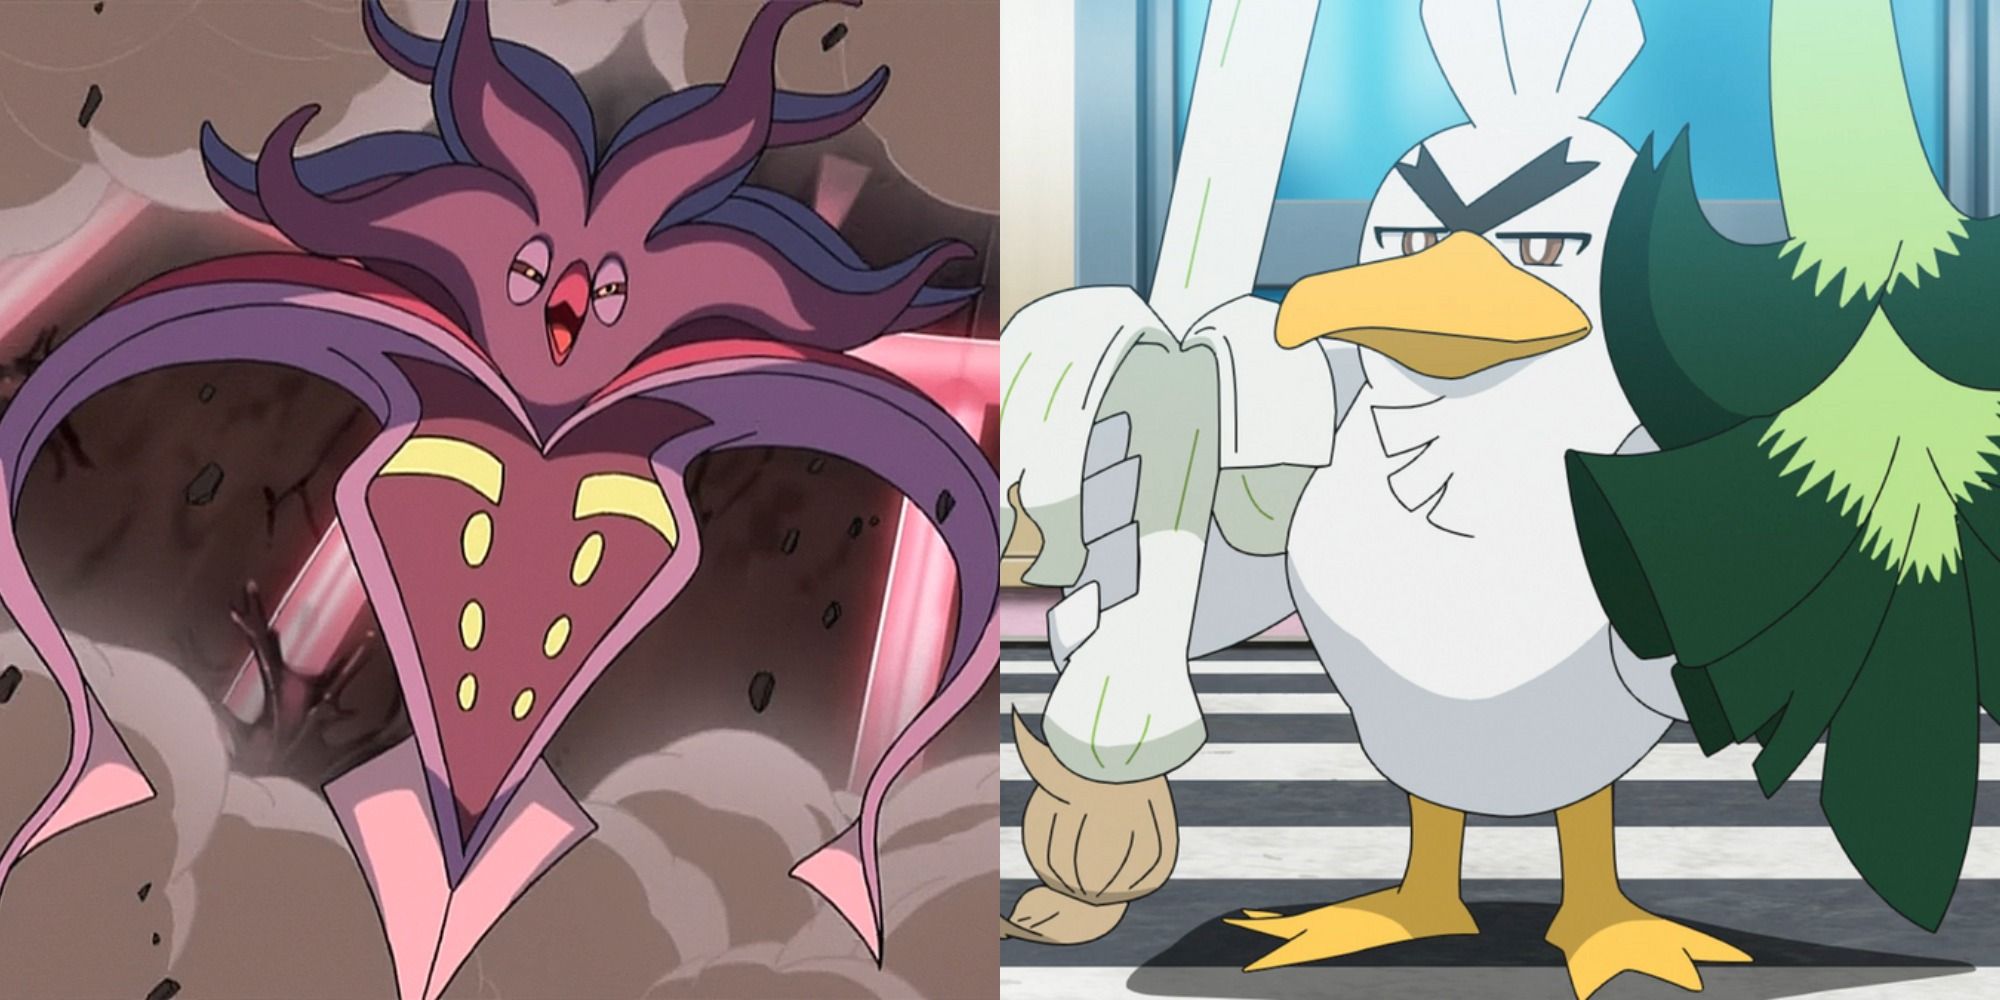 Split image showing a Malamar flying and laughing, and a Sirfetch'd standing in battle in the Pokémon anime